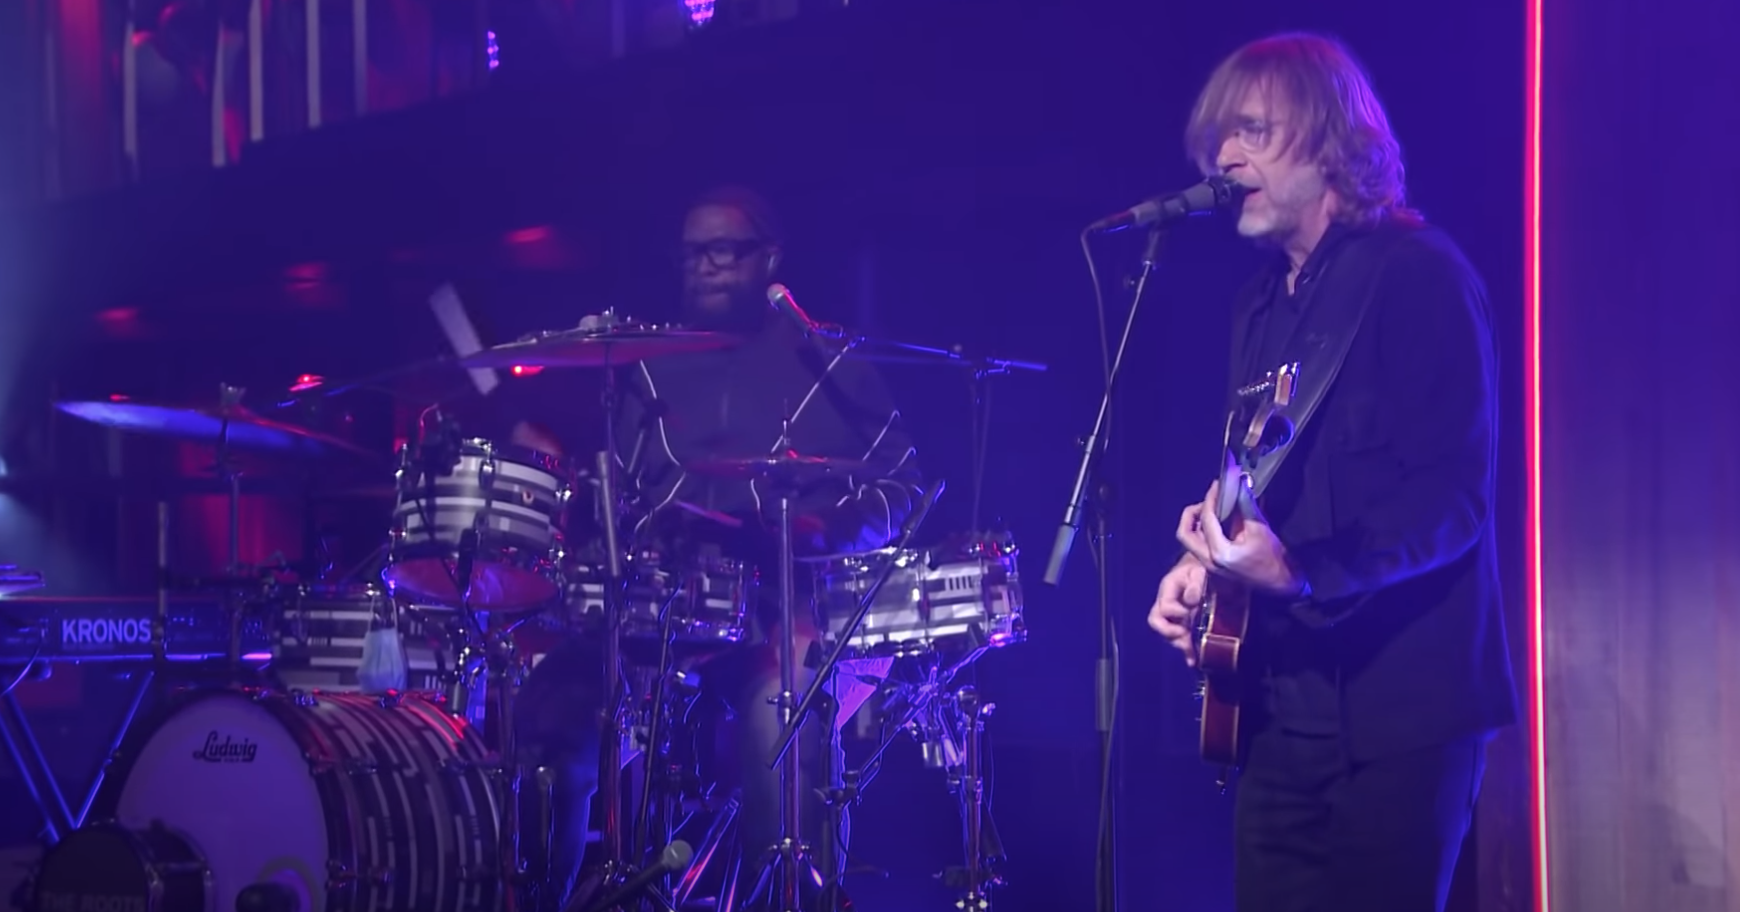 Watch Trey Anastasio and The Roots Perform “I Never Needed You Like This Before” on ‘The Tonight Show’